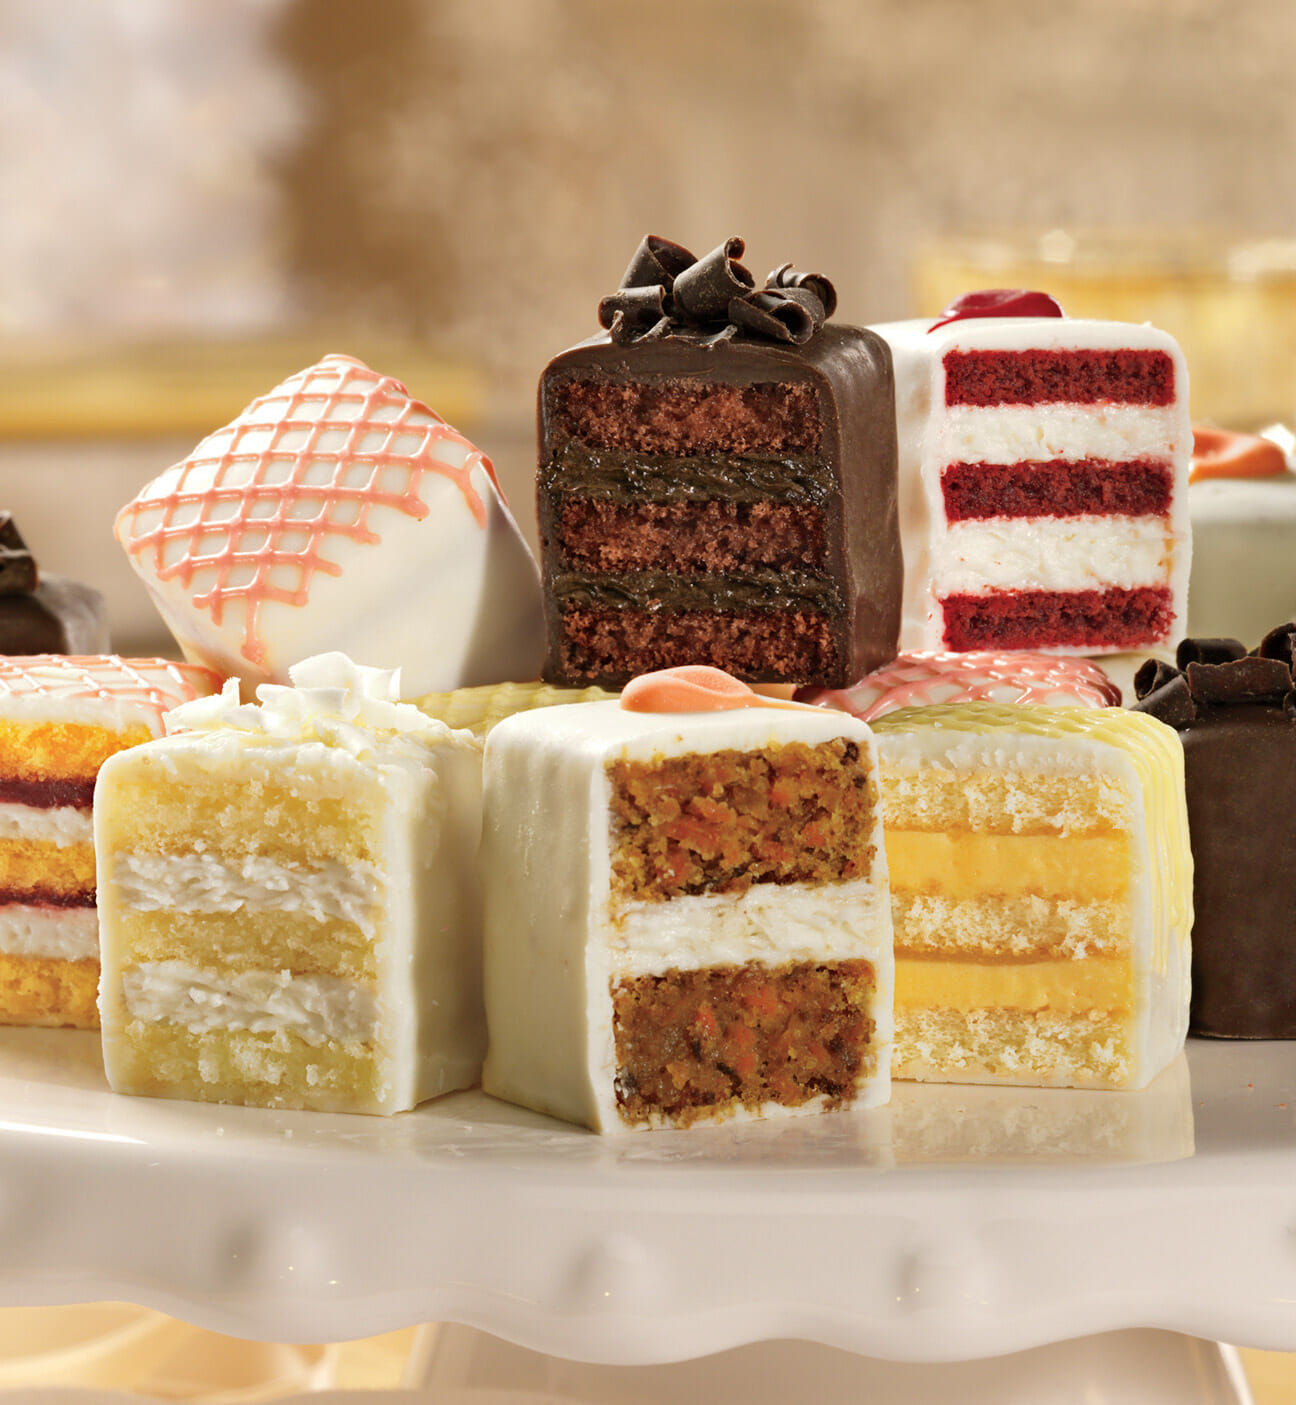 A box of 24 Petits Fours in six flavors coated with chocolate or white confection and decorated with chocolate, coconut, or icing designs